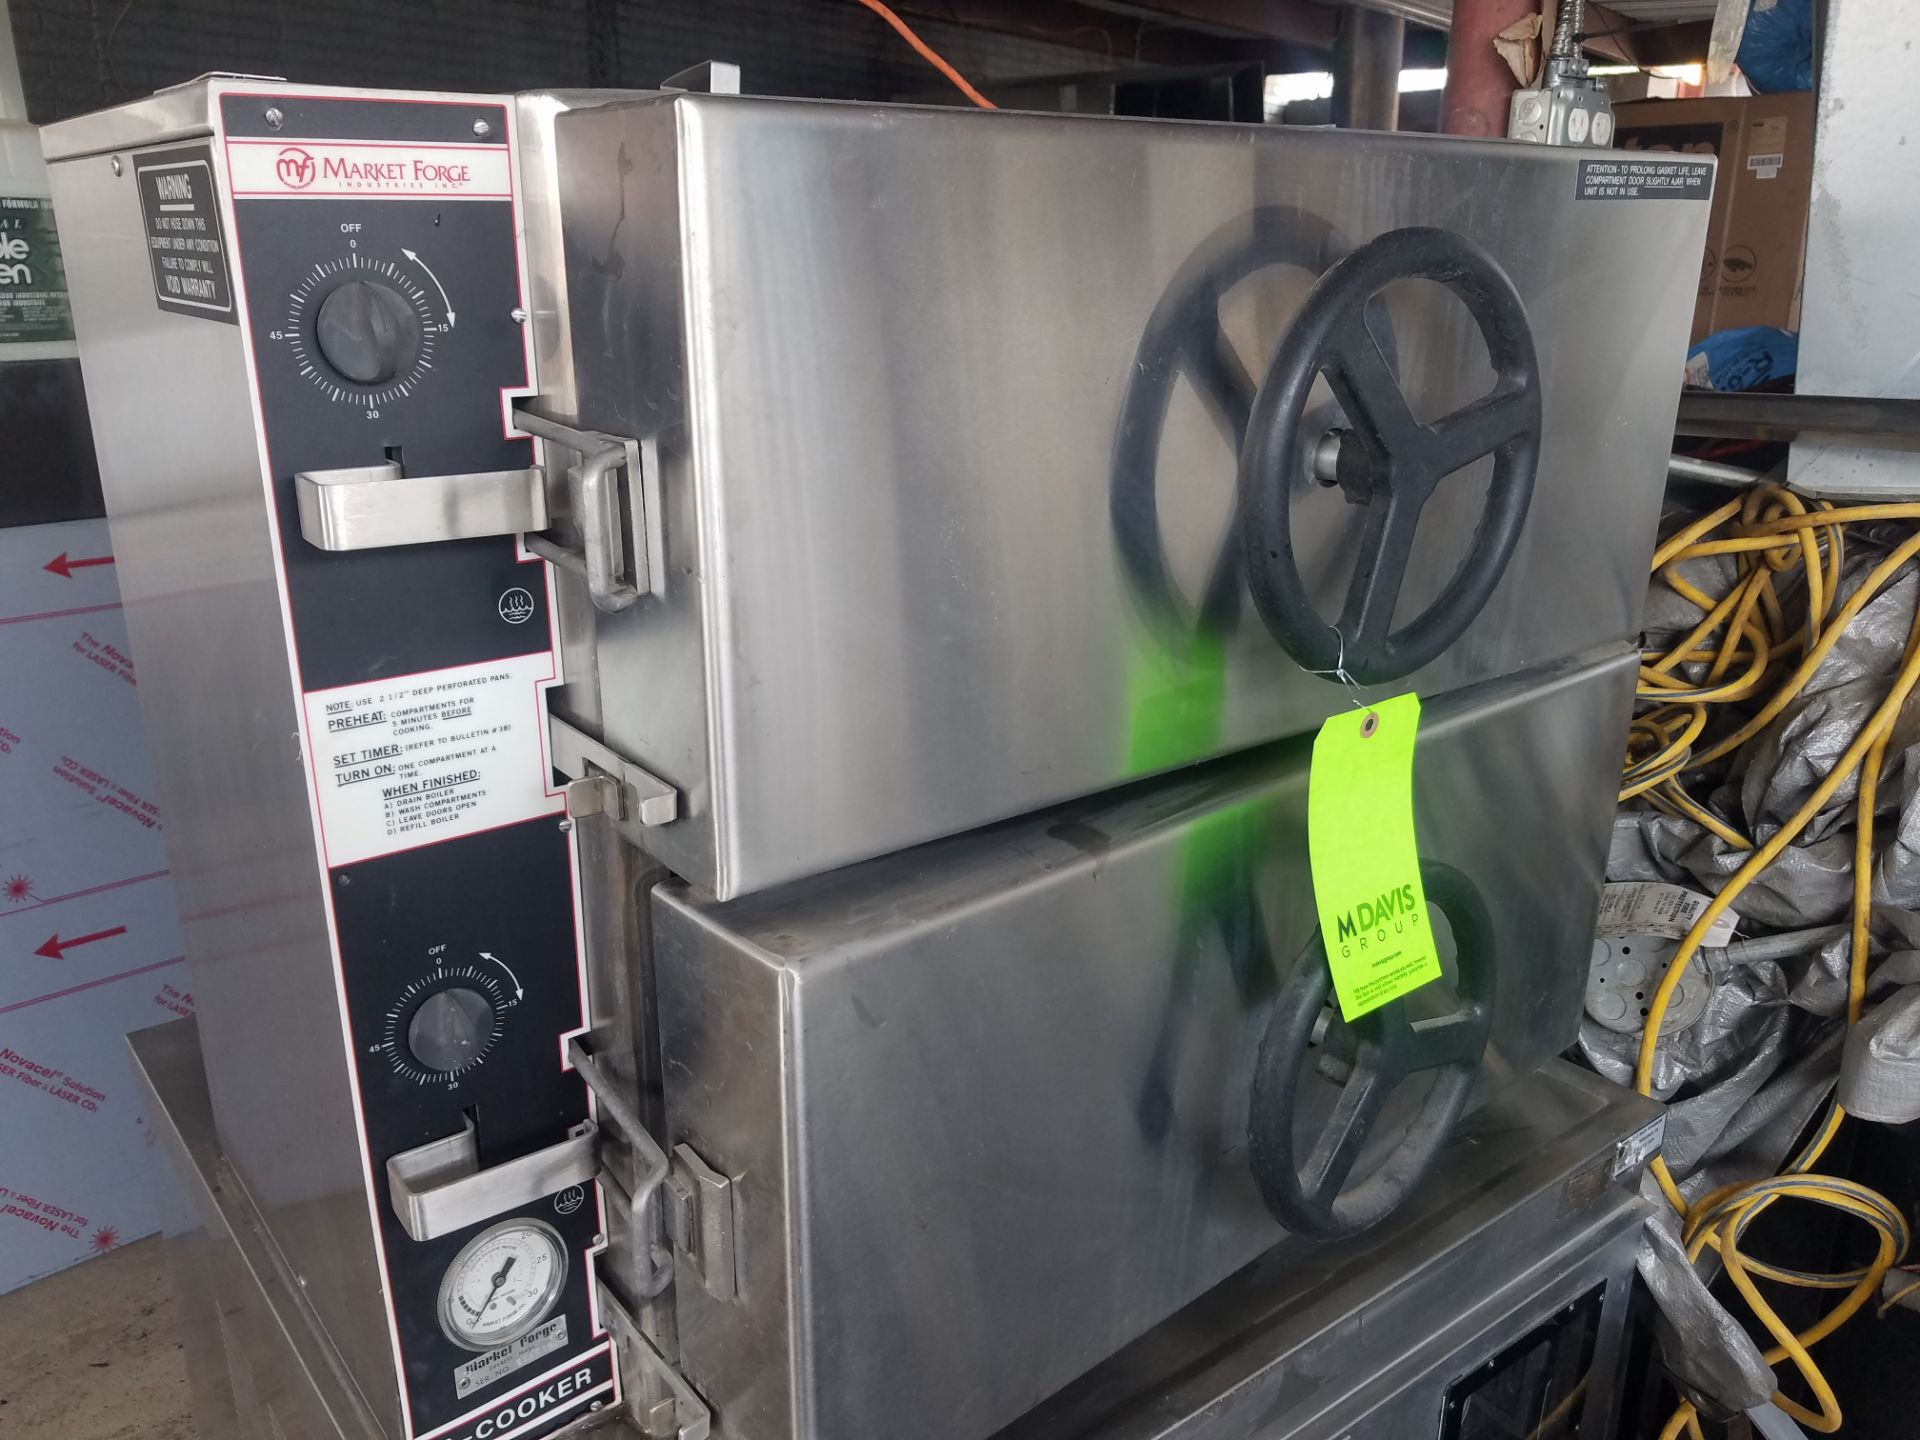 Market Forge Gas Steam Oven, Model 2A1, S/N 216508 (Rigging, Loading & Site Management Fee $50.00 - Image 2 of 5